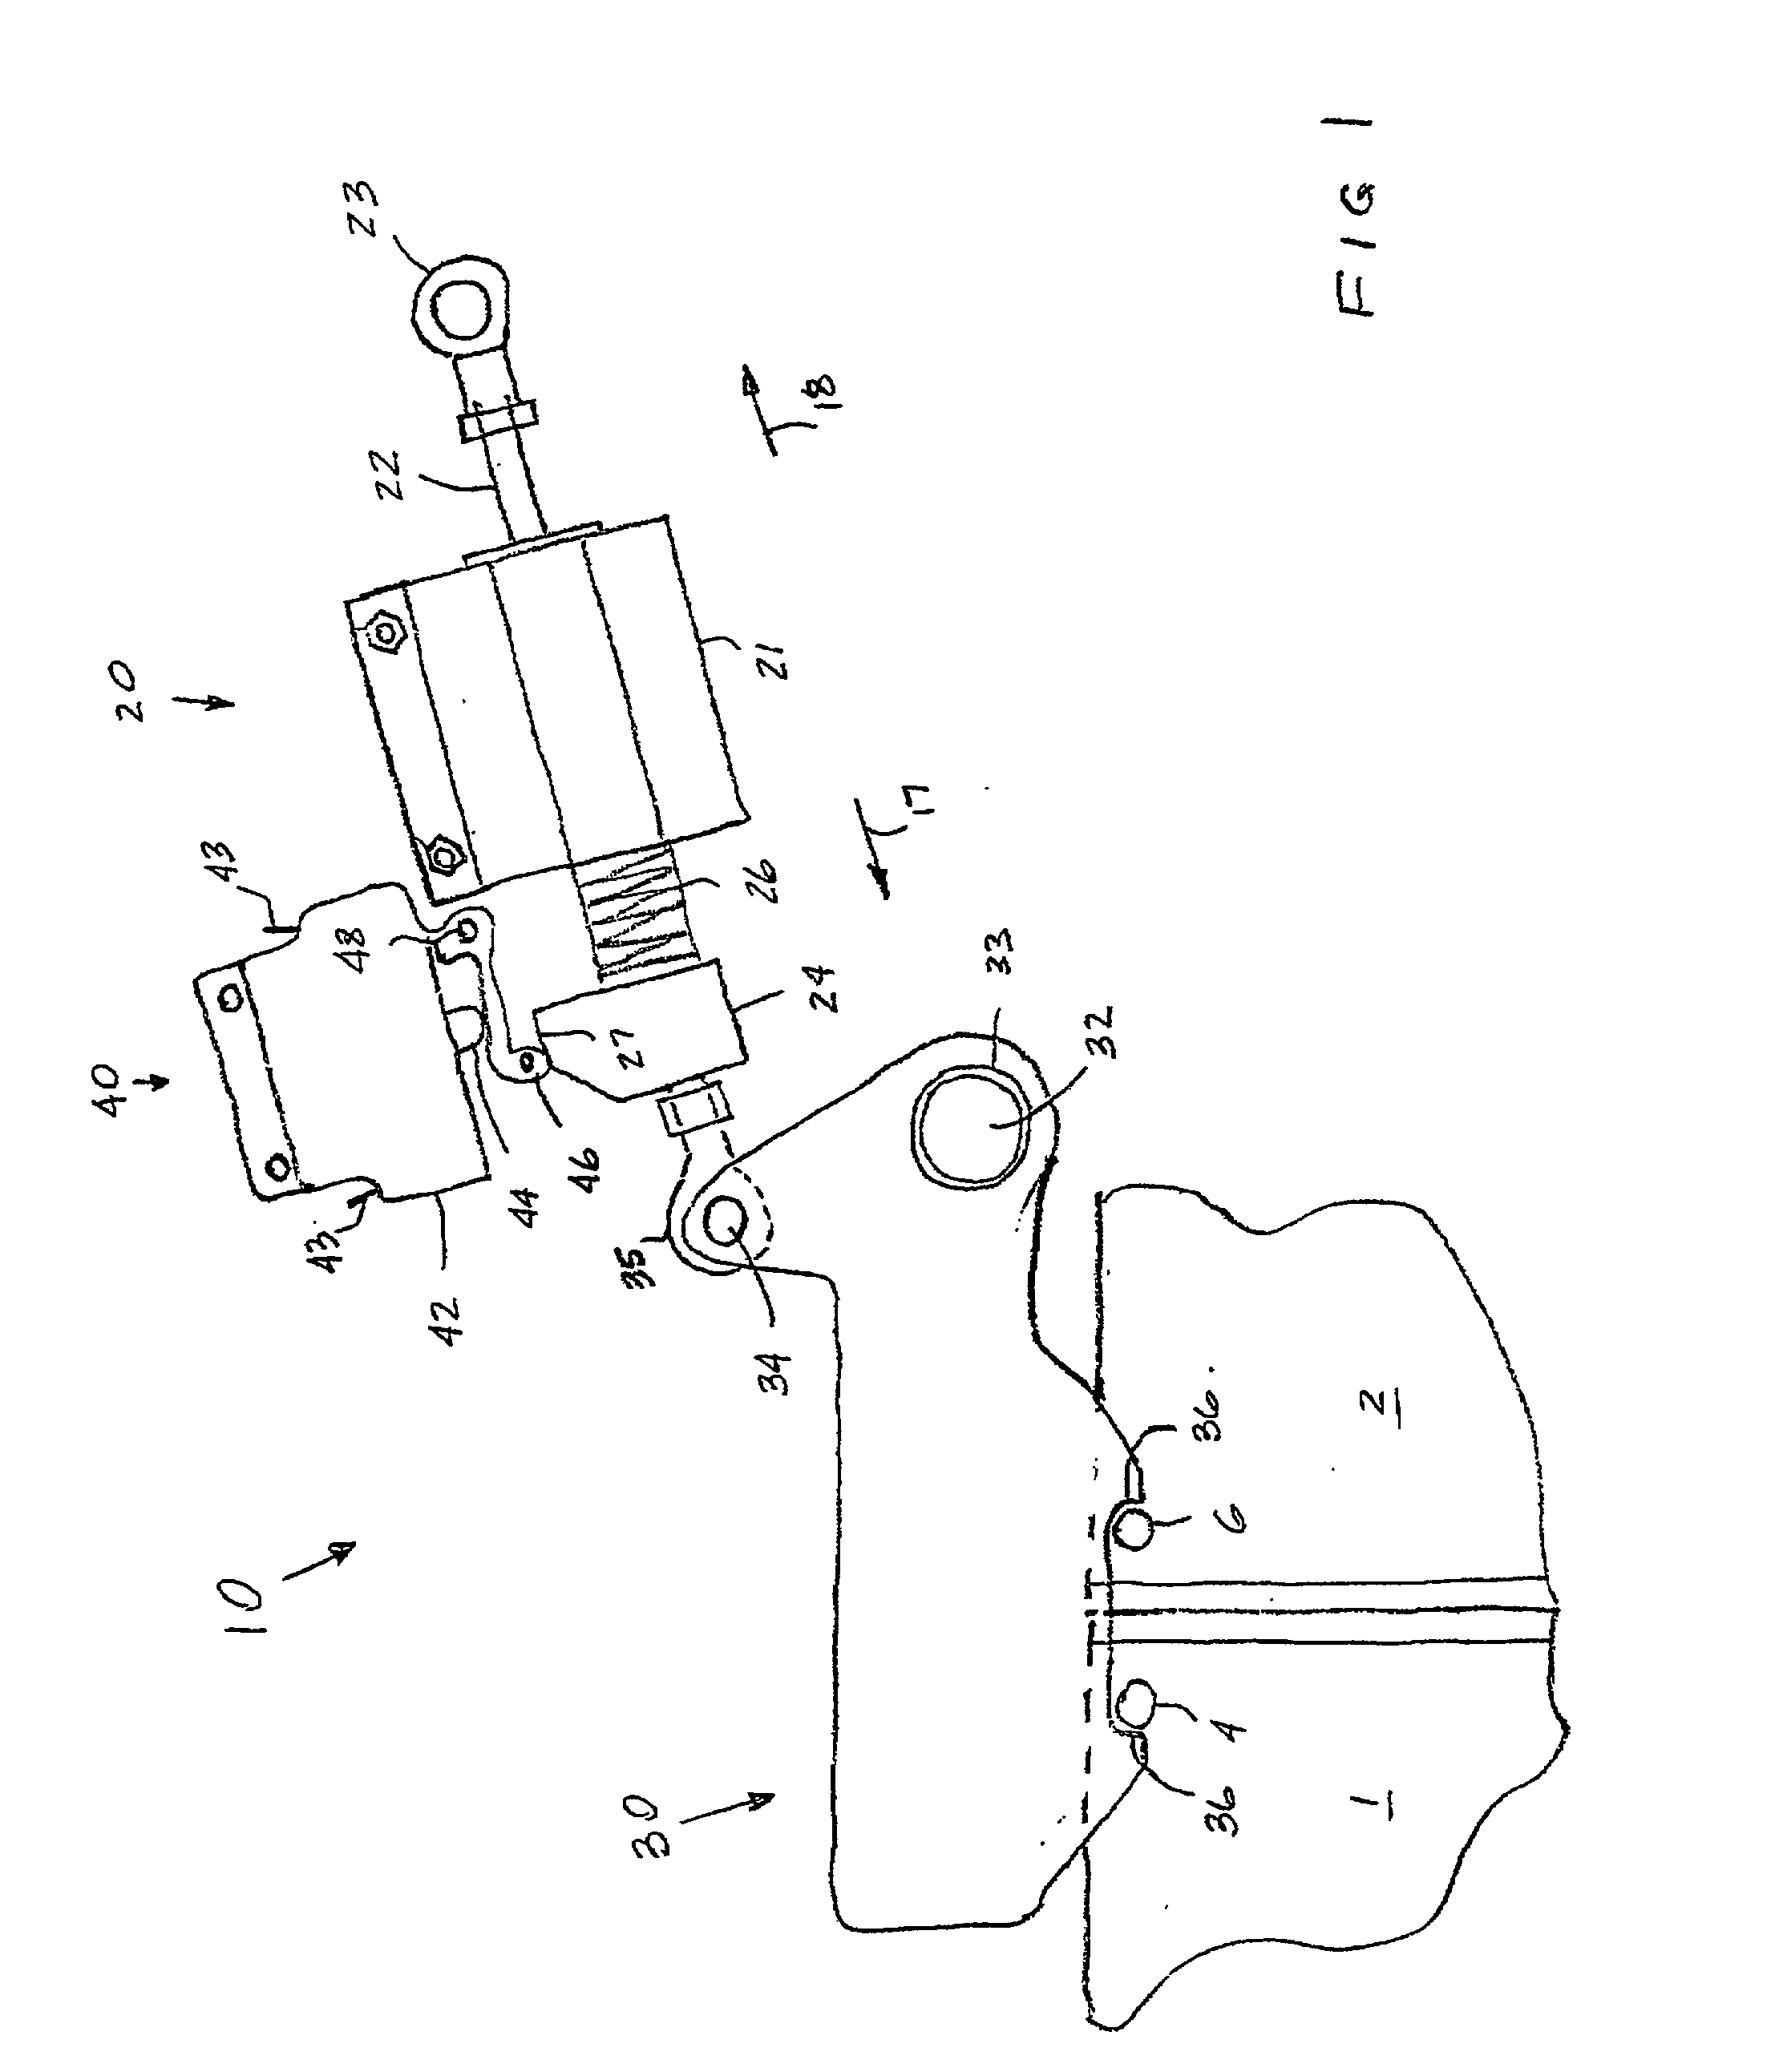 Linearly actuated locking device for transit vehicle door system